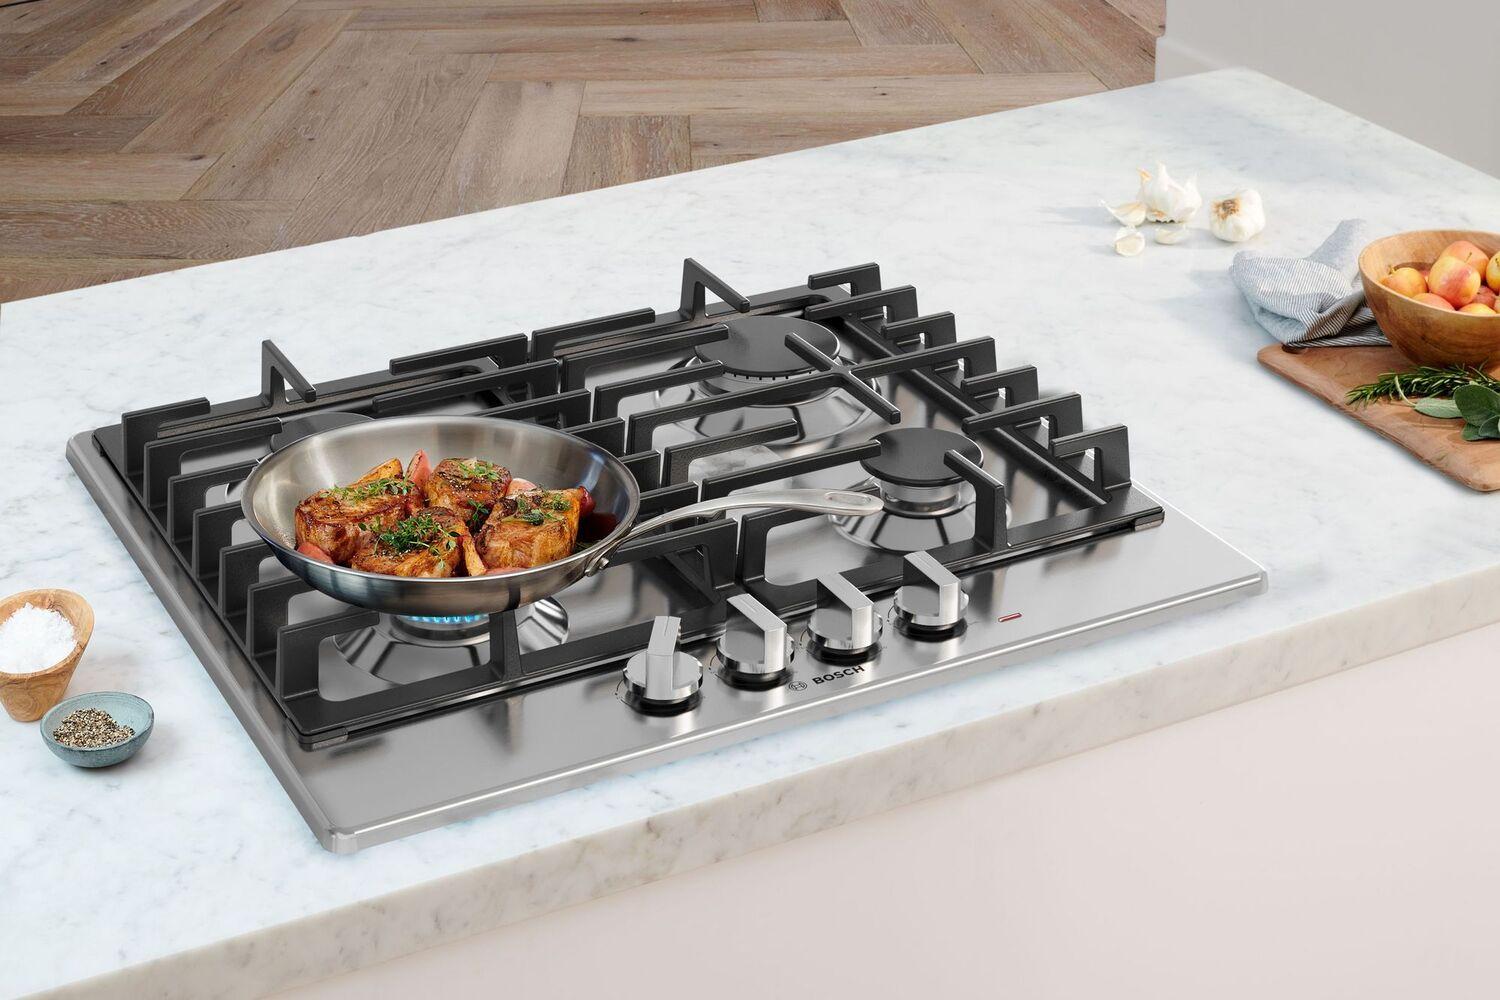 Bosch 500 Series Gas Cooktop Stainless steel NGM5453UC